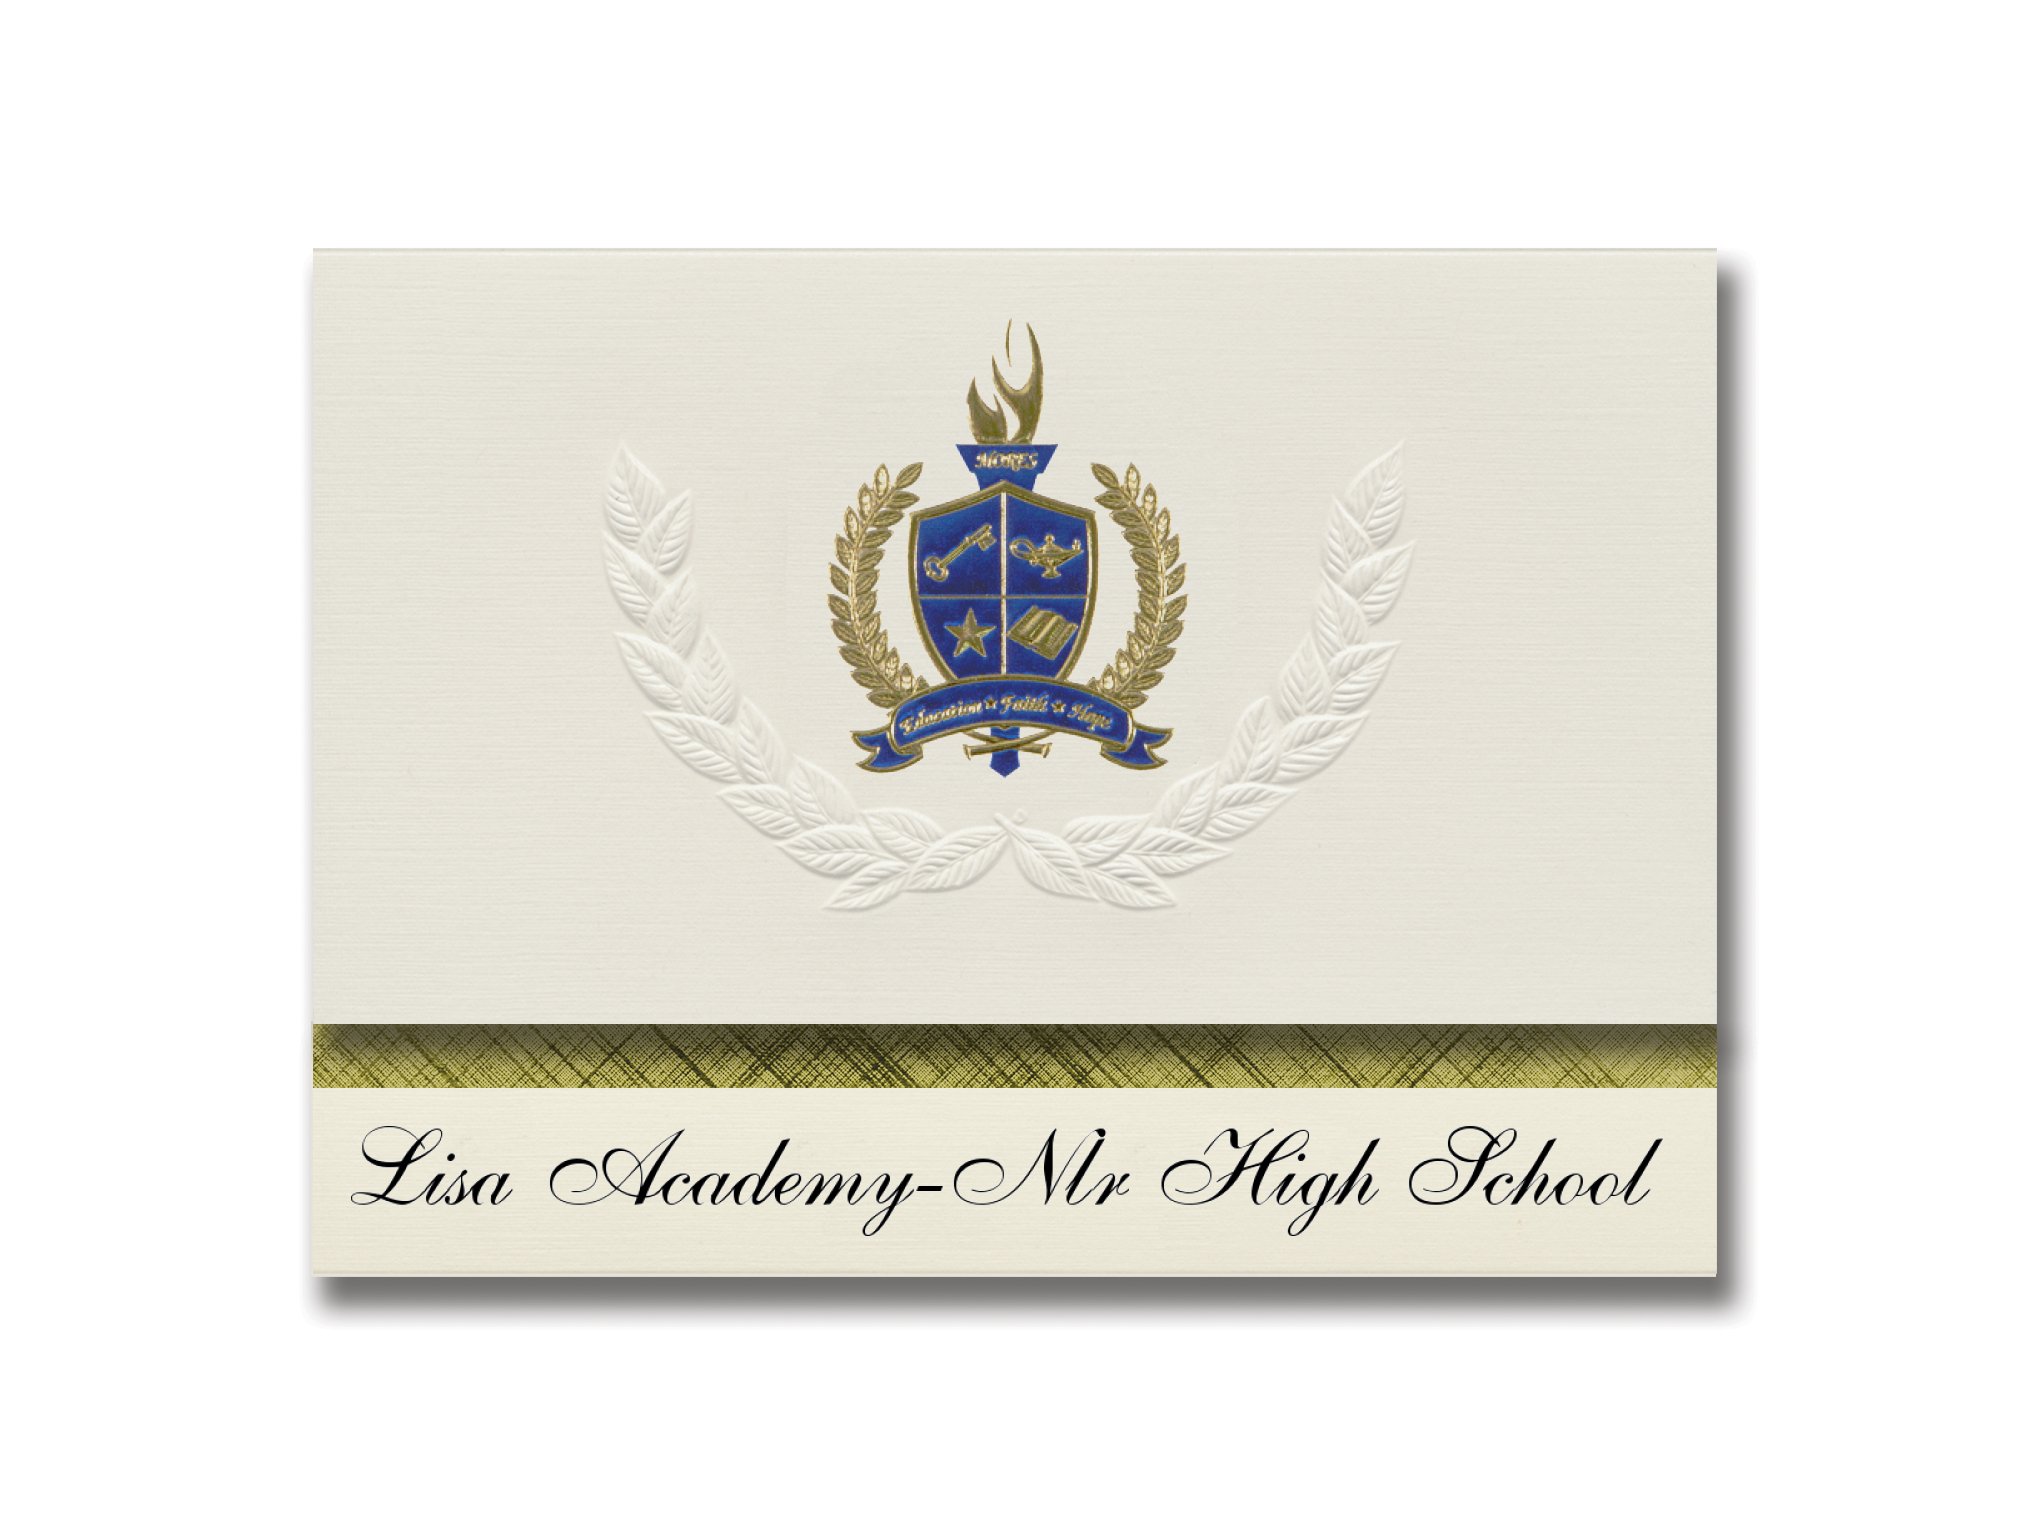 Signature Announcements Lisa Academy-Nlr High School (Sherwood, AR) Graduation Announcements, Presidential style, Basic package of 25 with Gold & B...